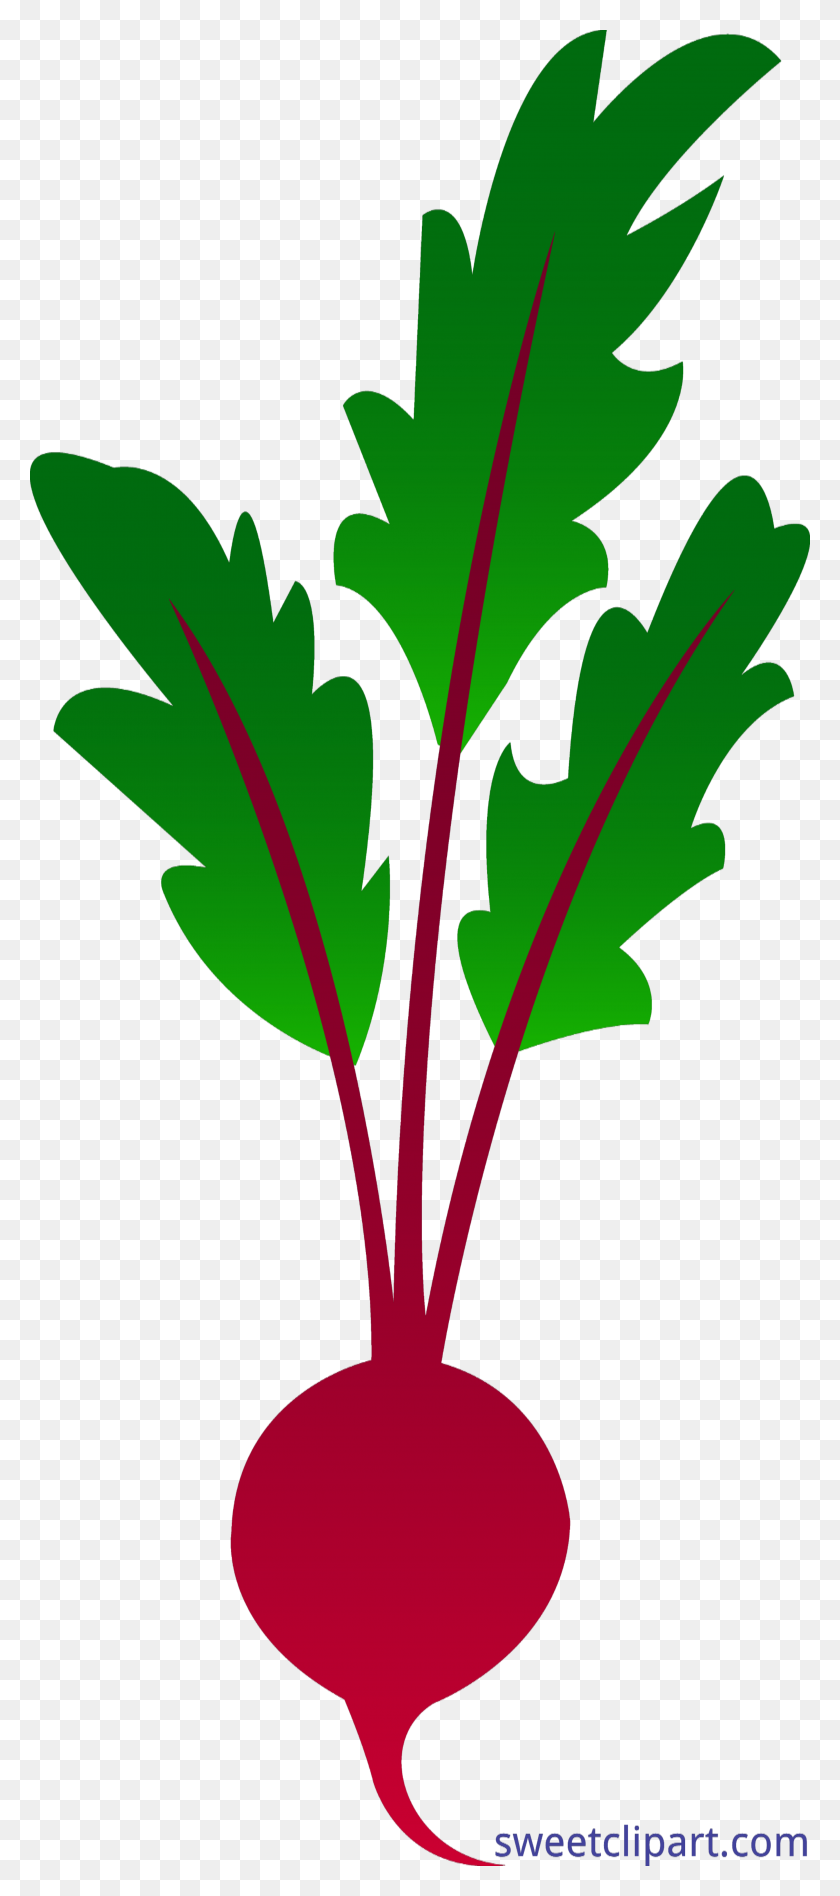 3470x8171 Beet Clip Art - Beet Clipart Black And White